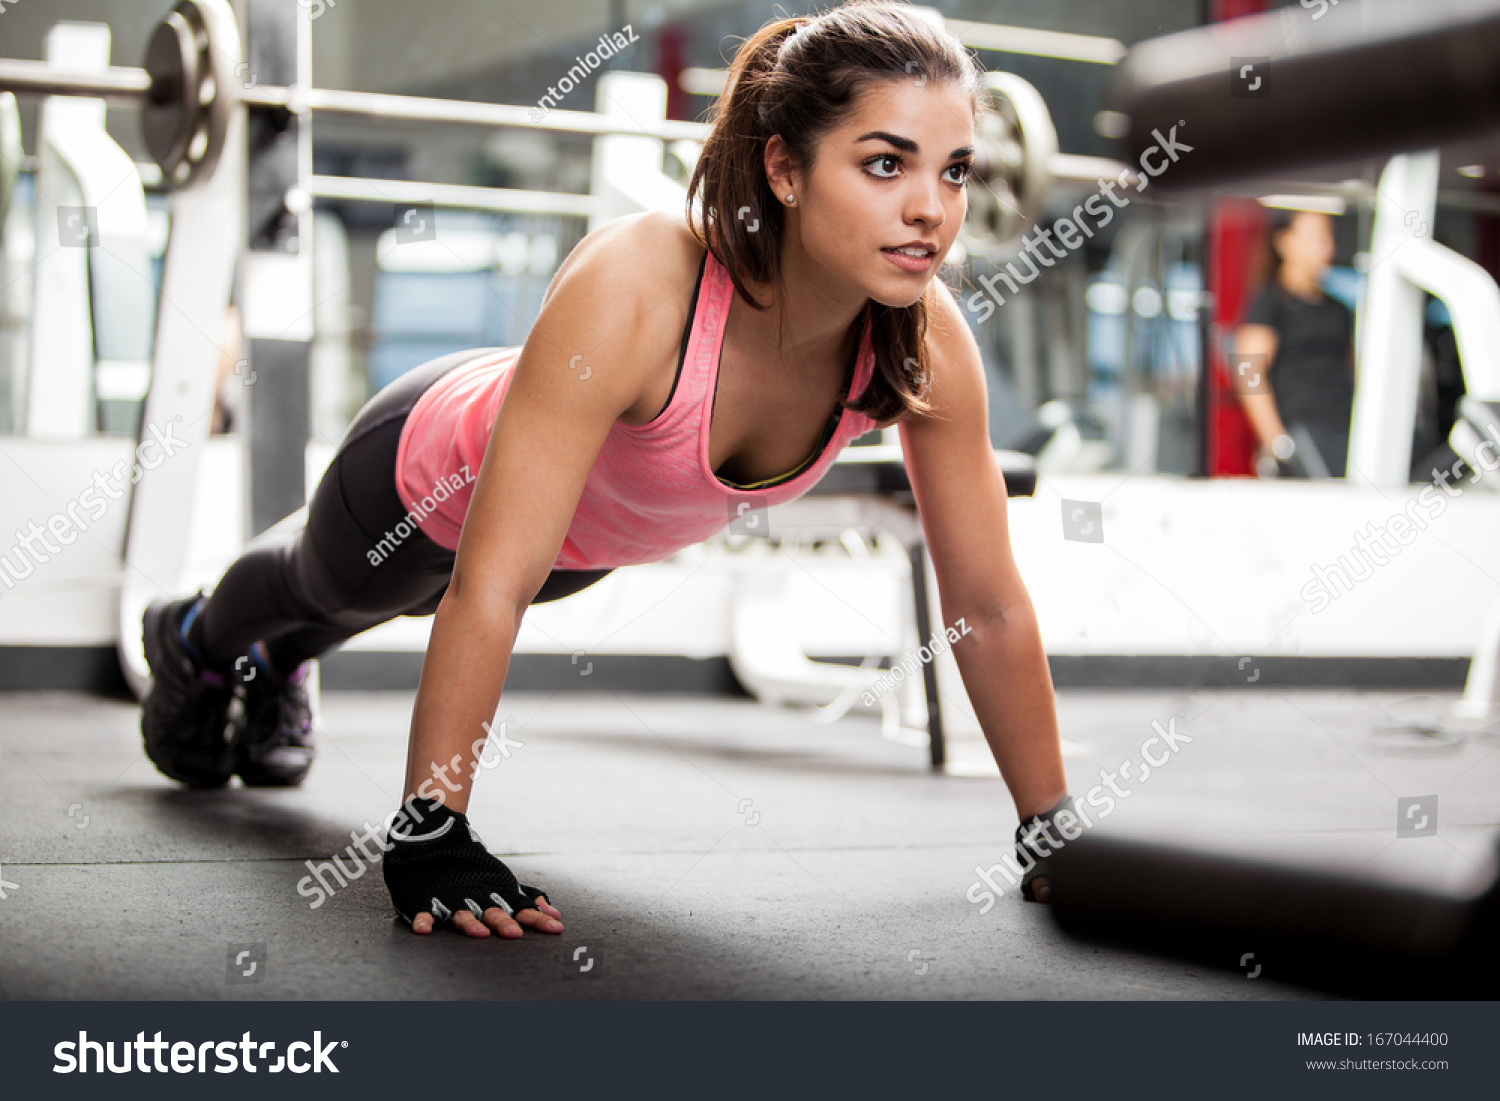 Gorgeous brunette warming up and doing some push ups a the gym #167044400